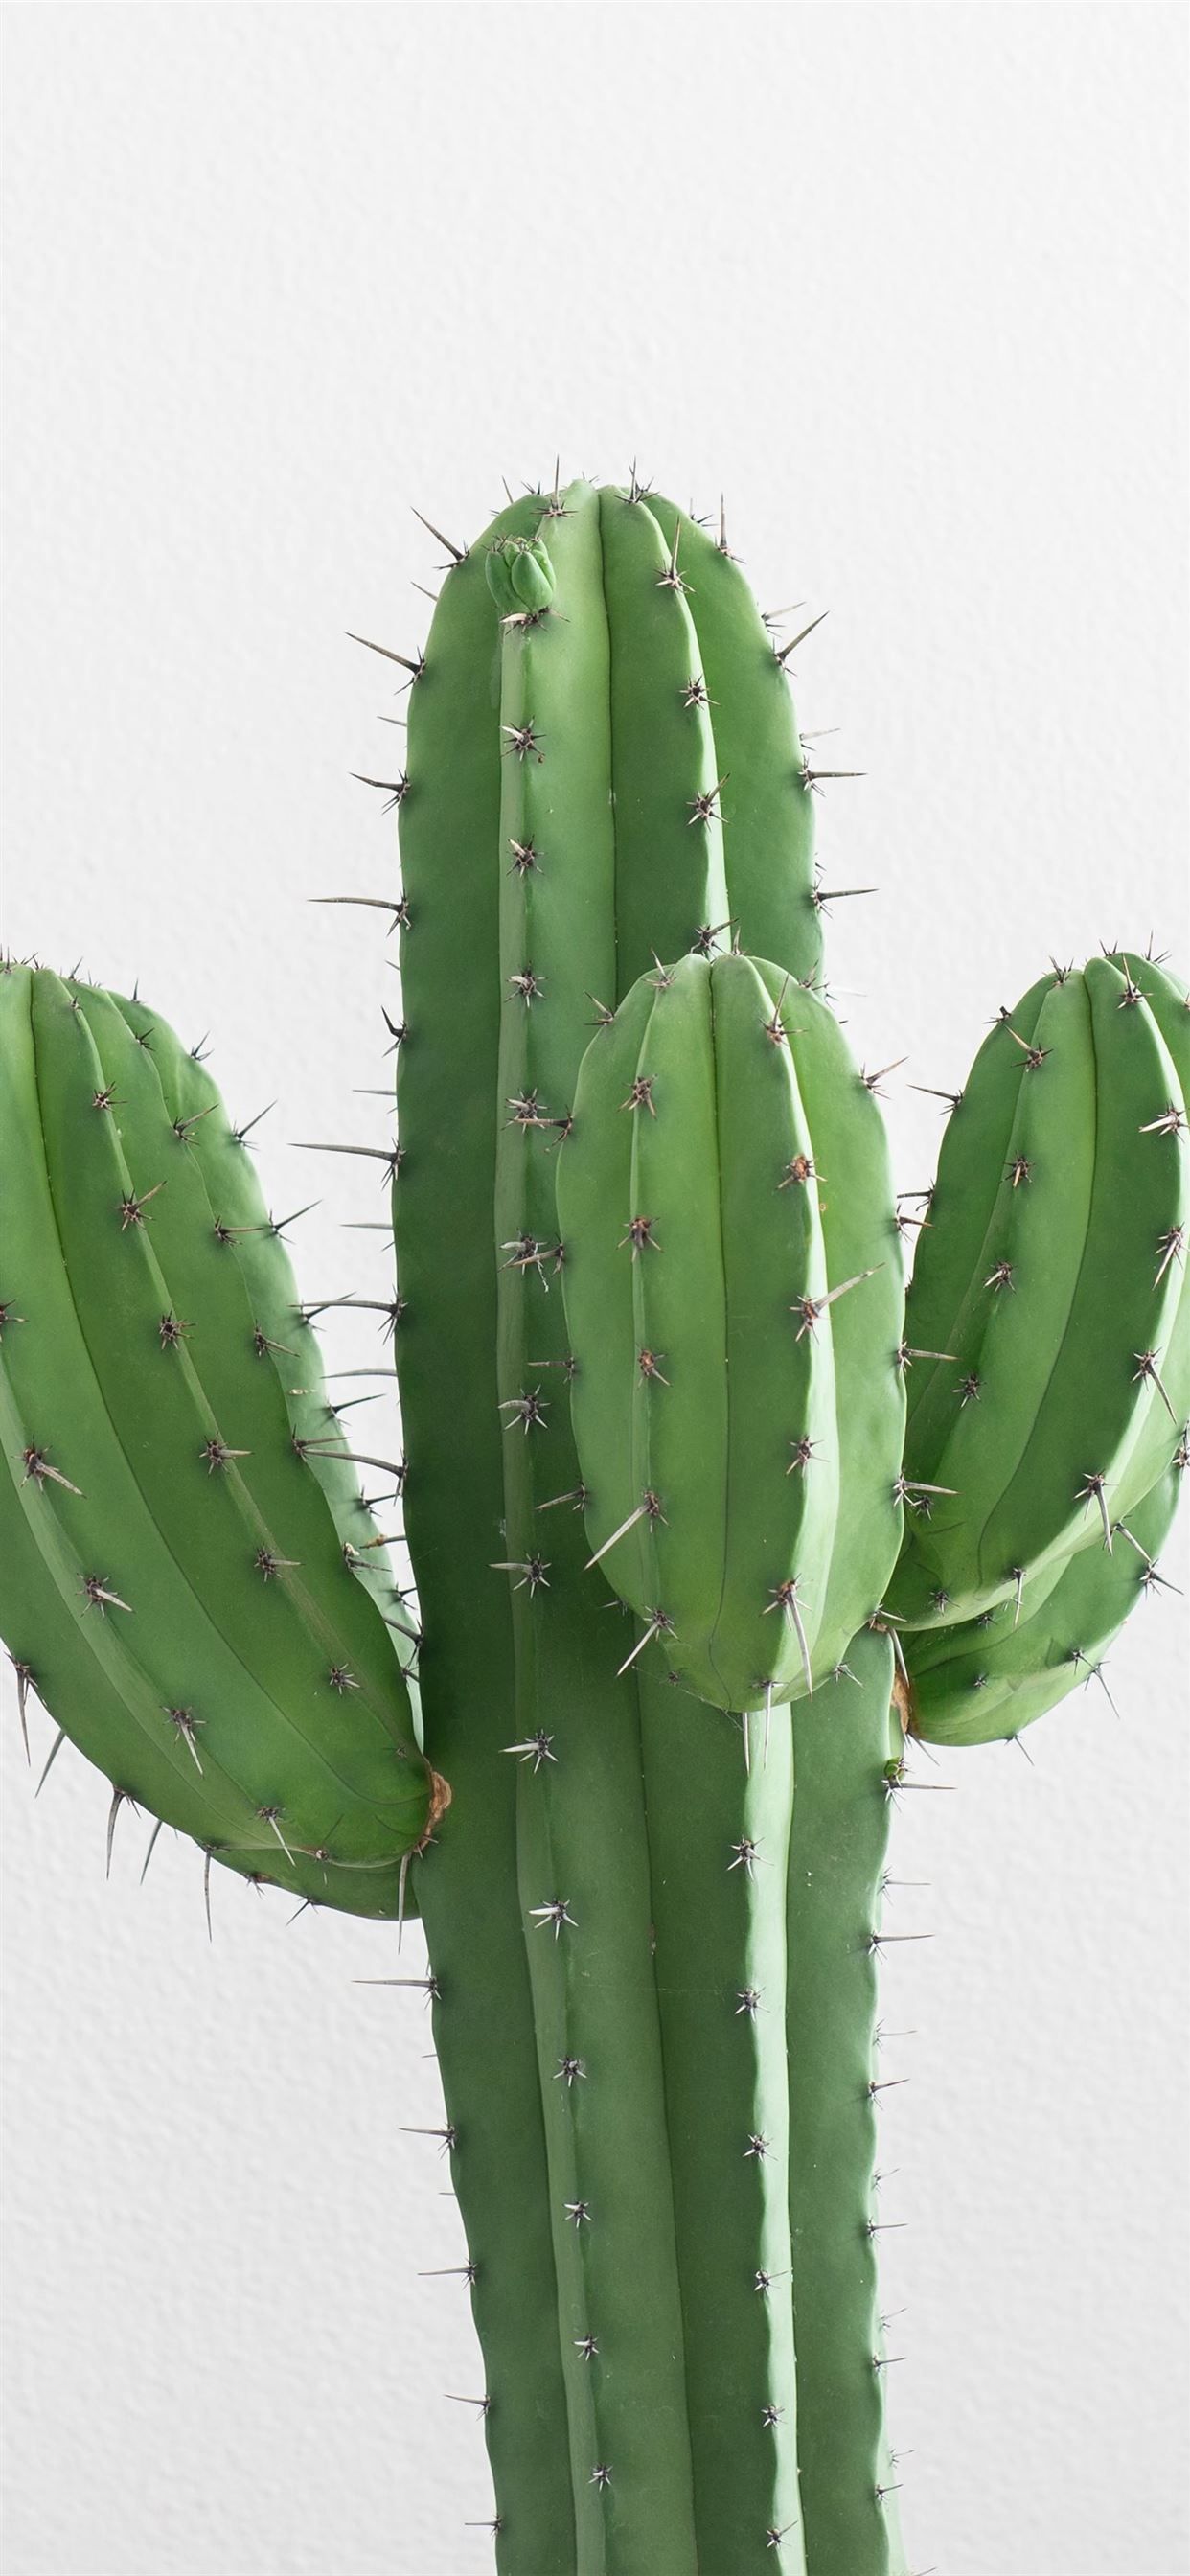 A cactus with large spines on a white background - Cactus